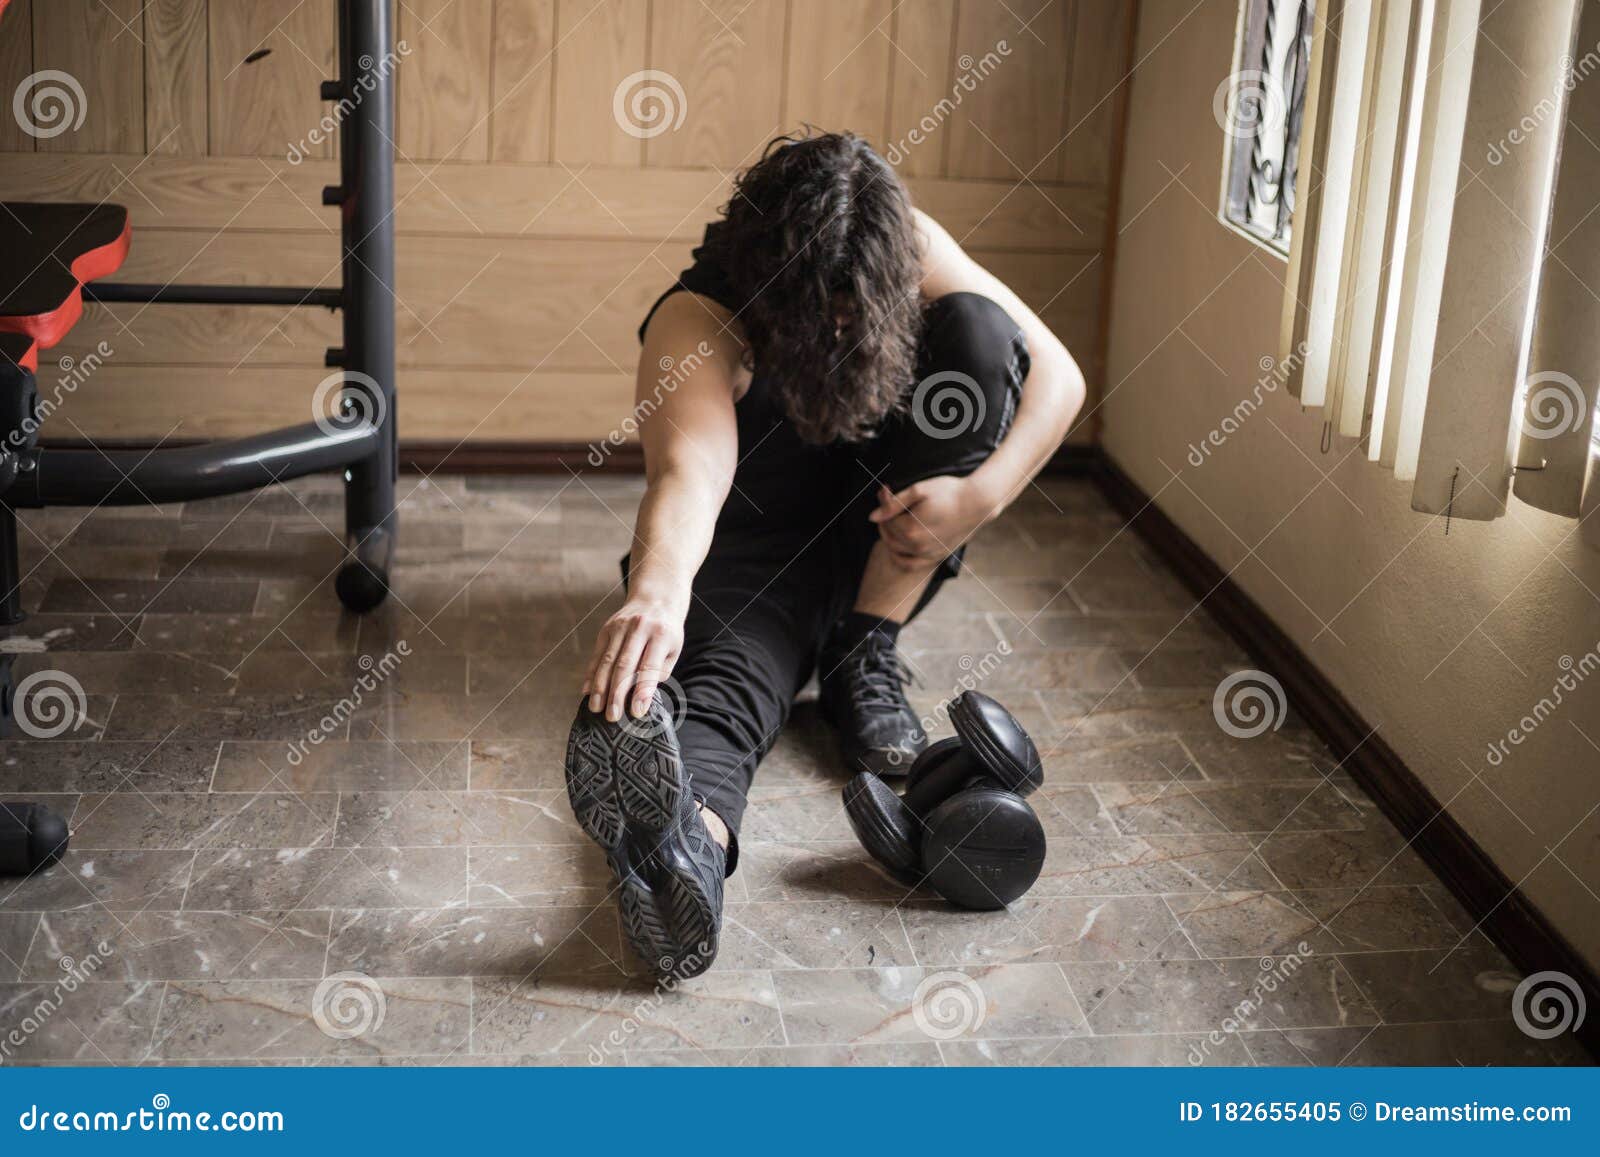 A boy exercising at home stock image